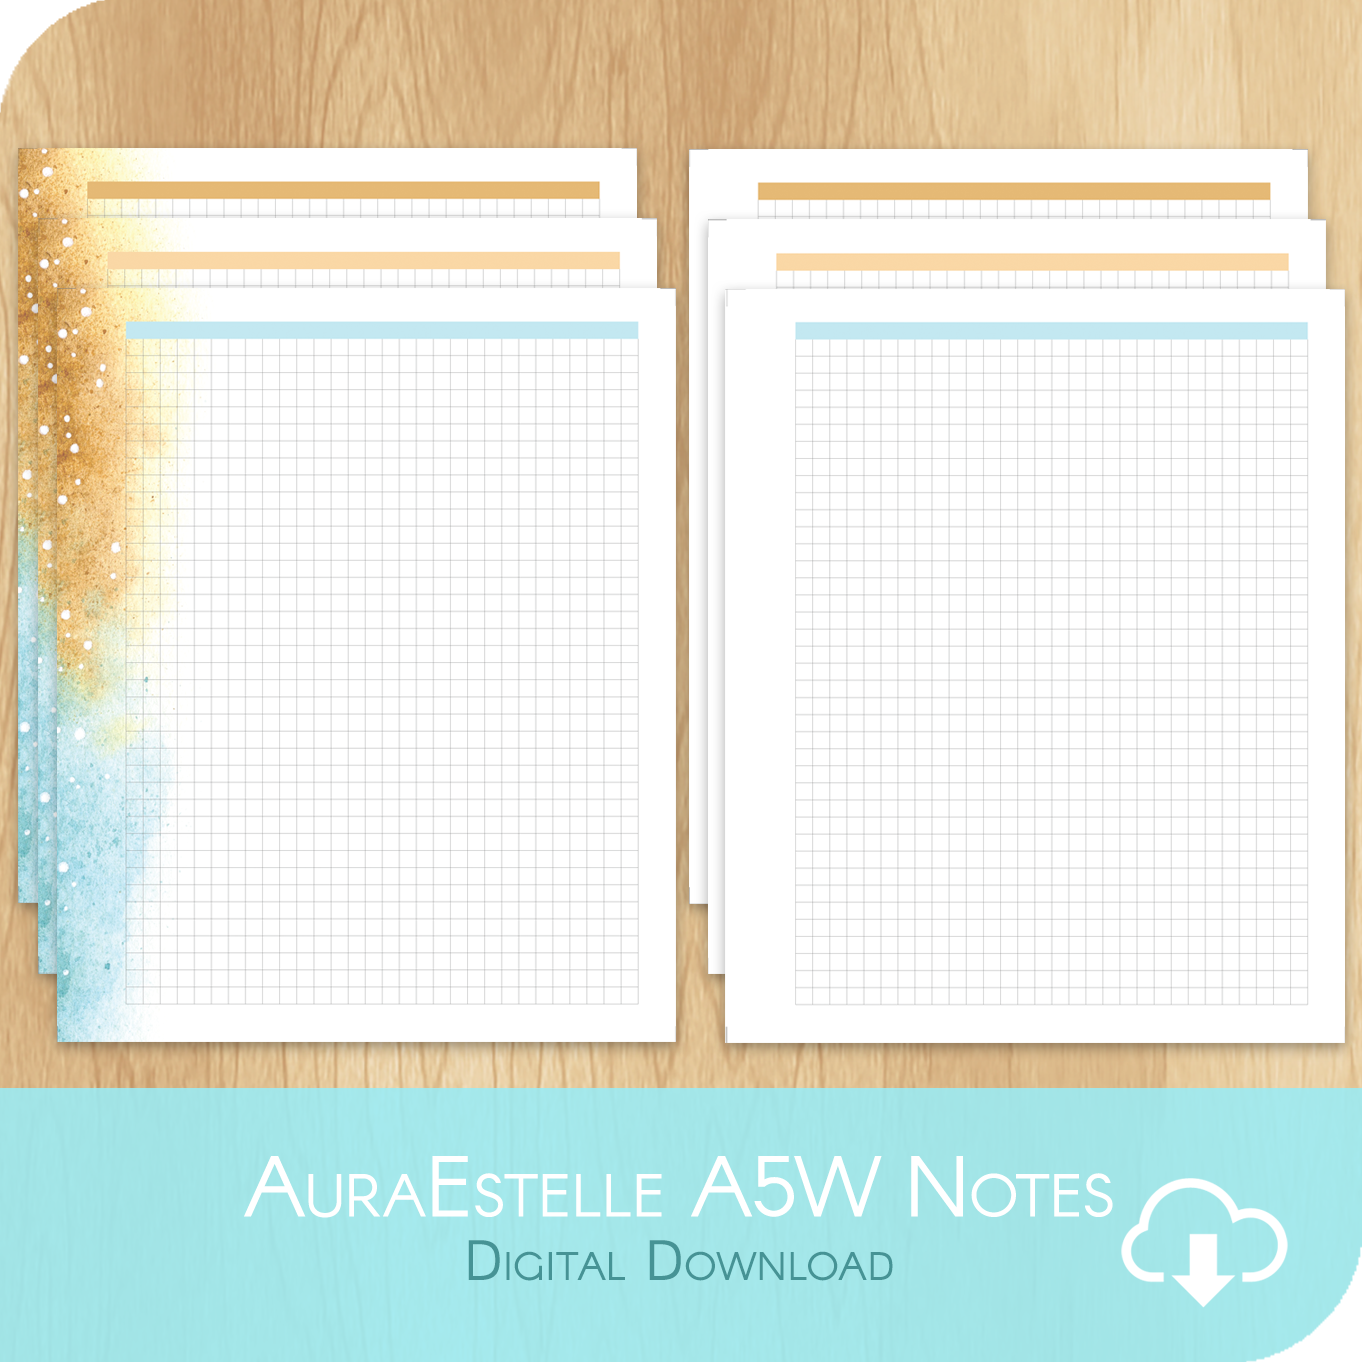 Feathery Fall - Printable Aura Estelle A5 Wide Size - 2x3 Grid Notes Page